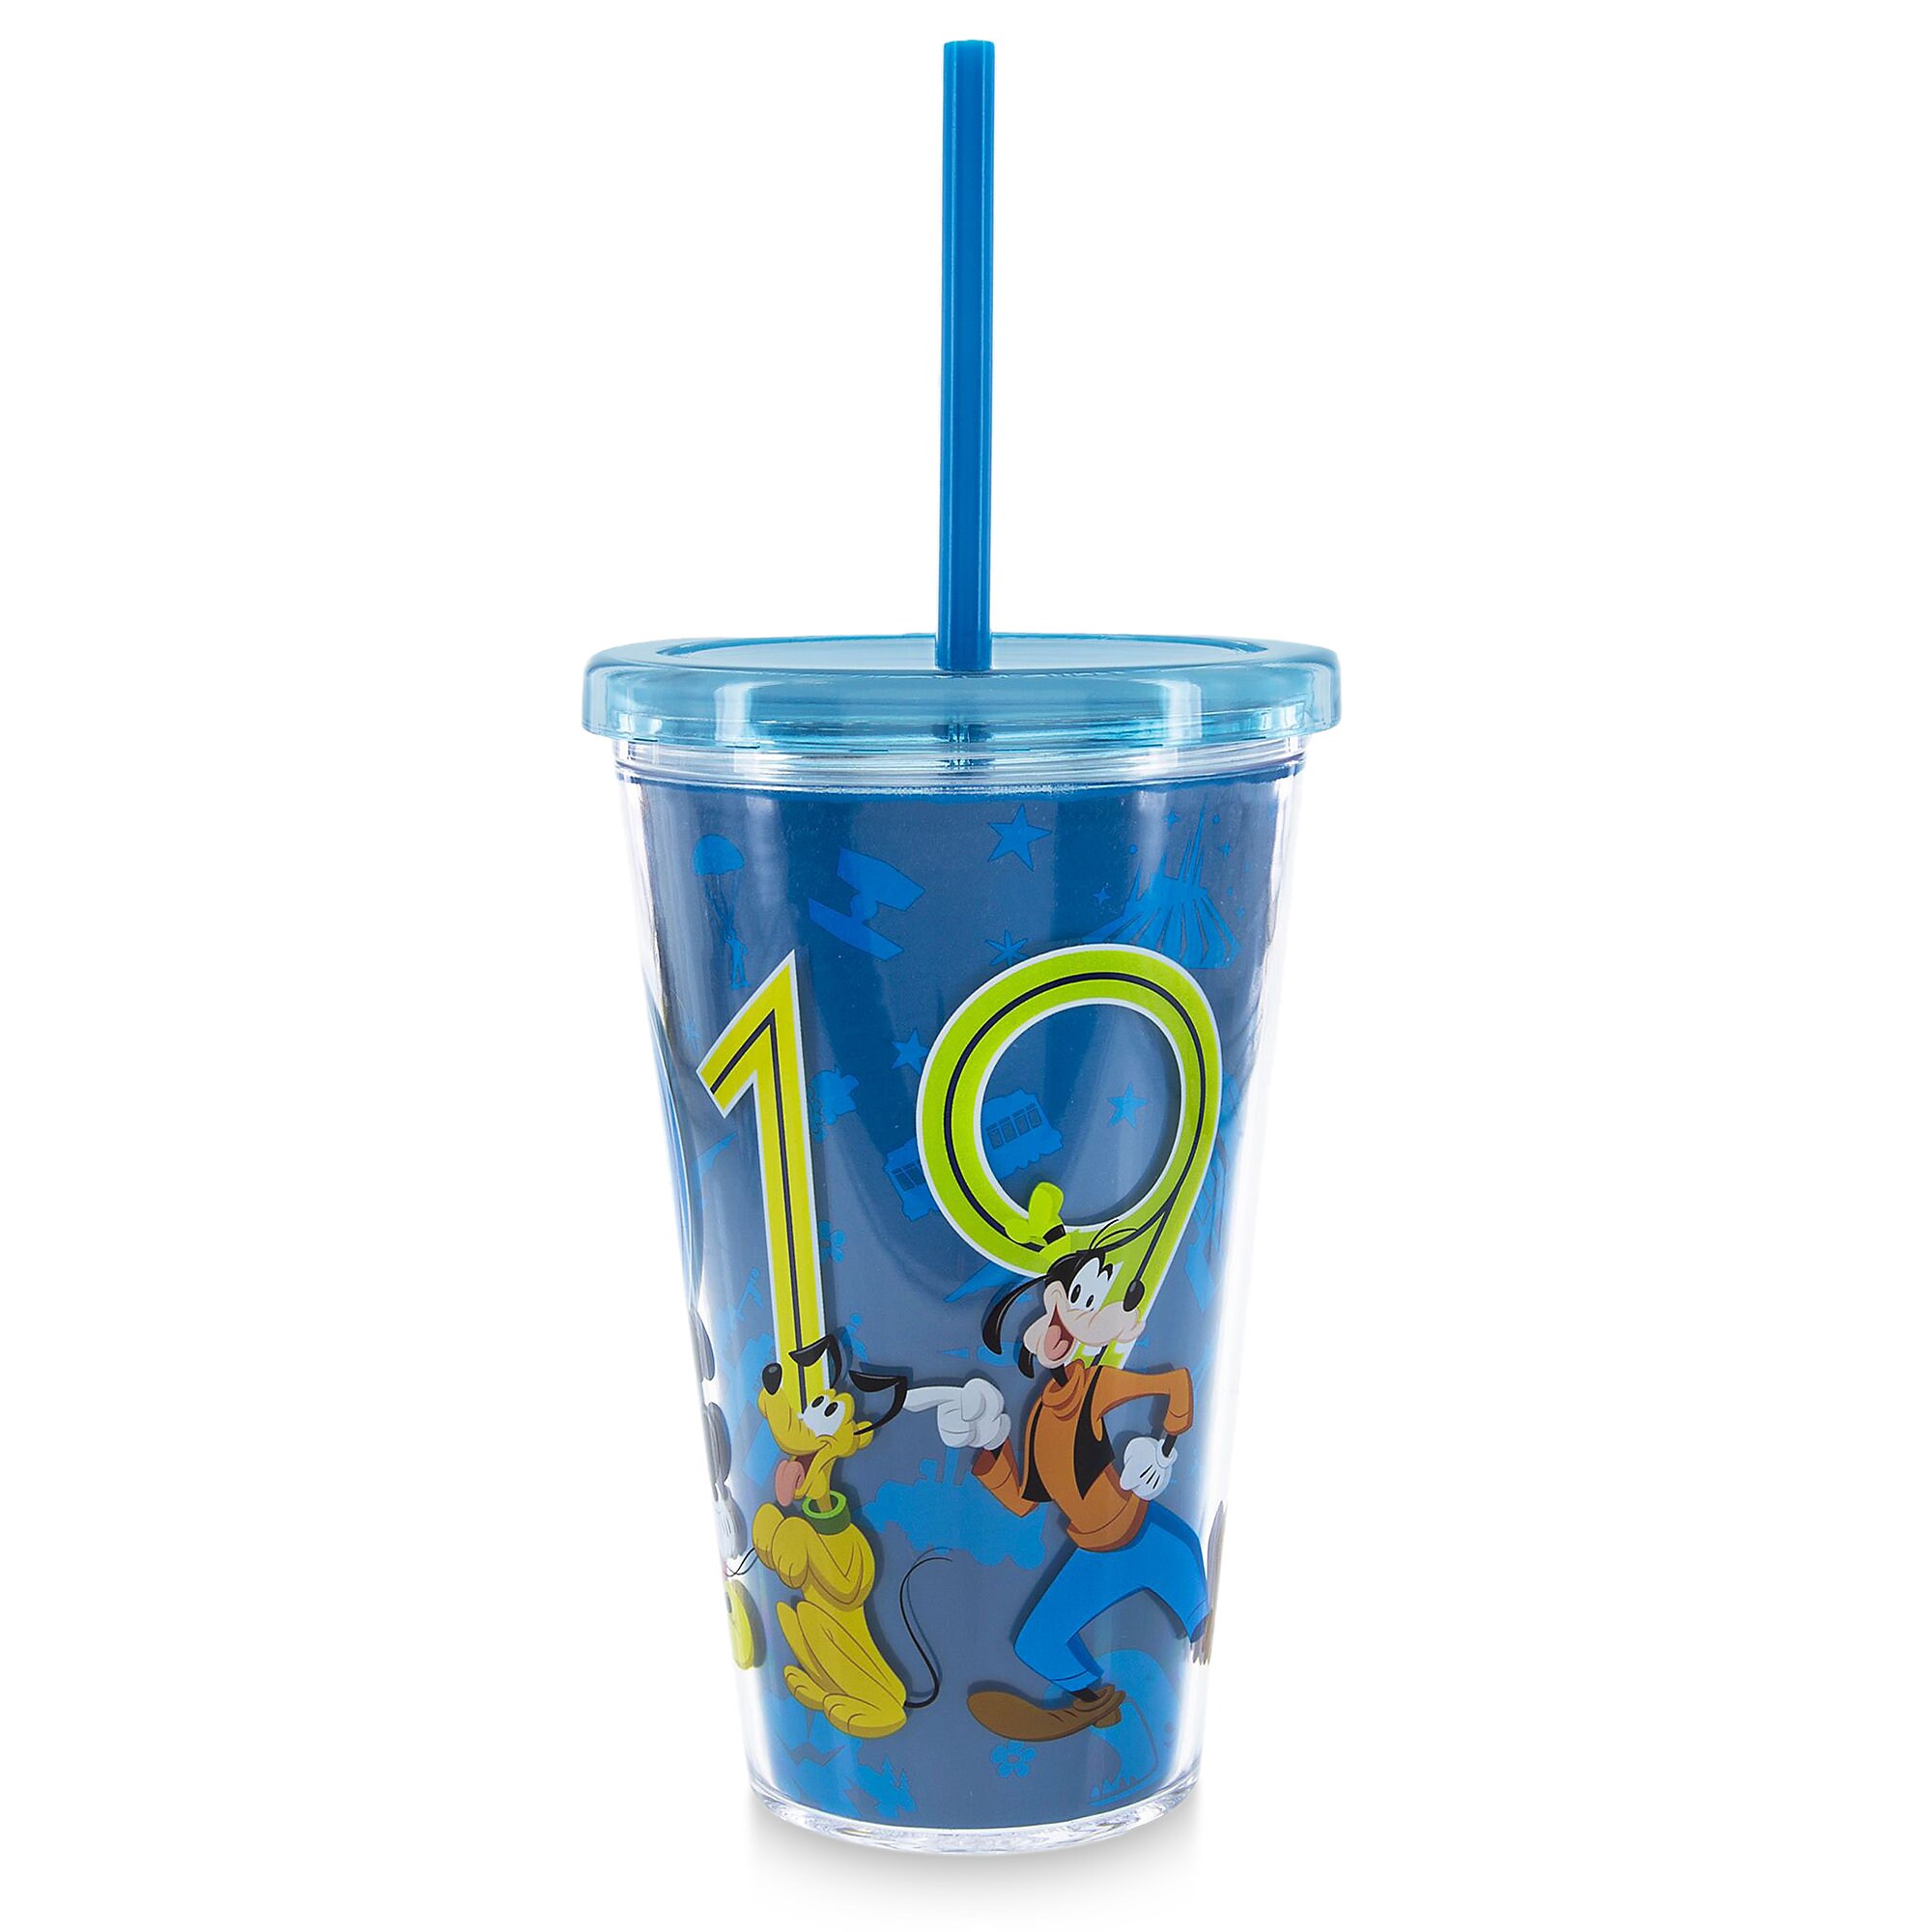 Mickey Mouse and Friends Tumbler with Straw - Walt Disney World 2019